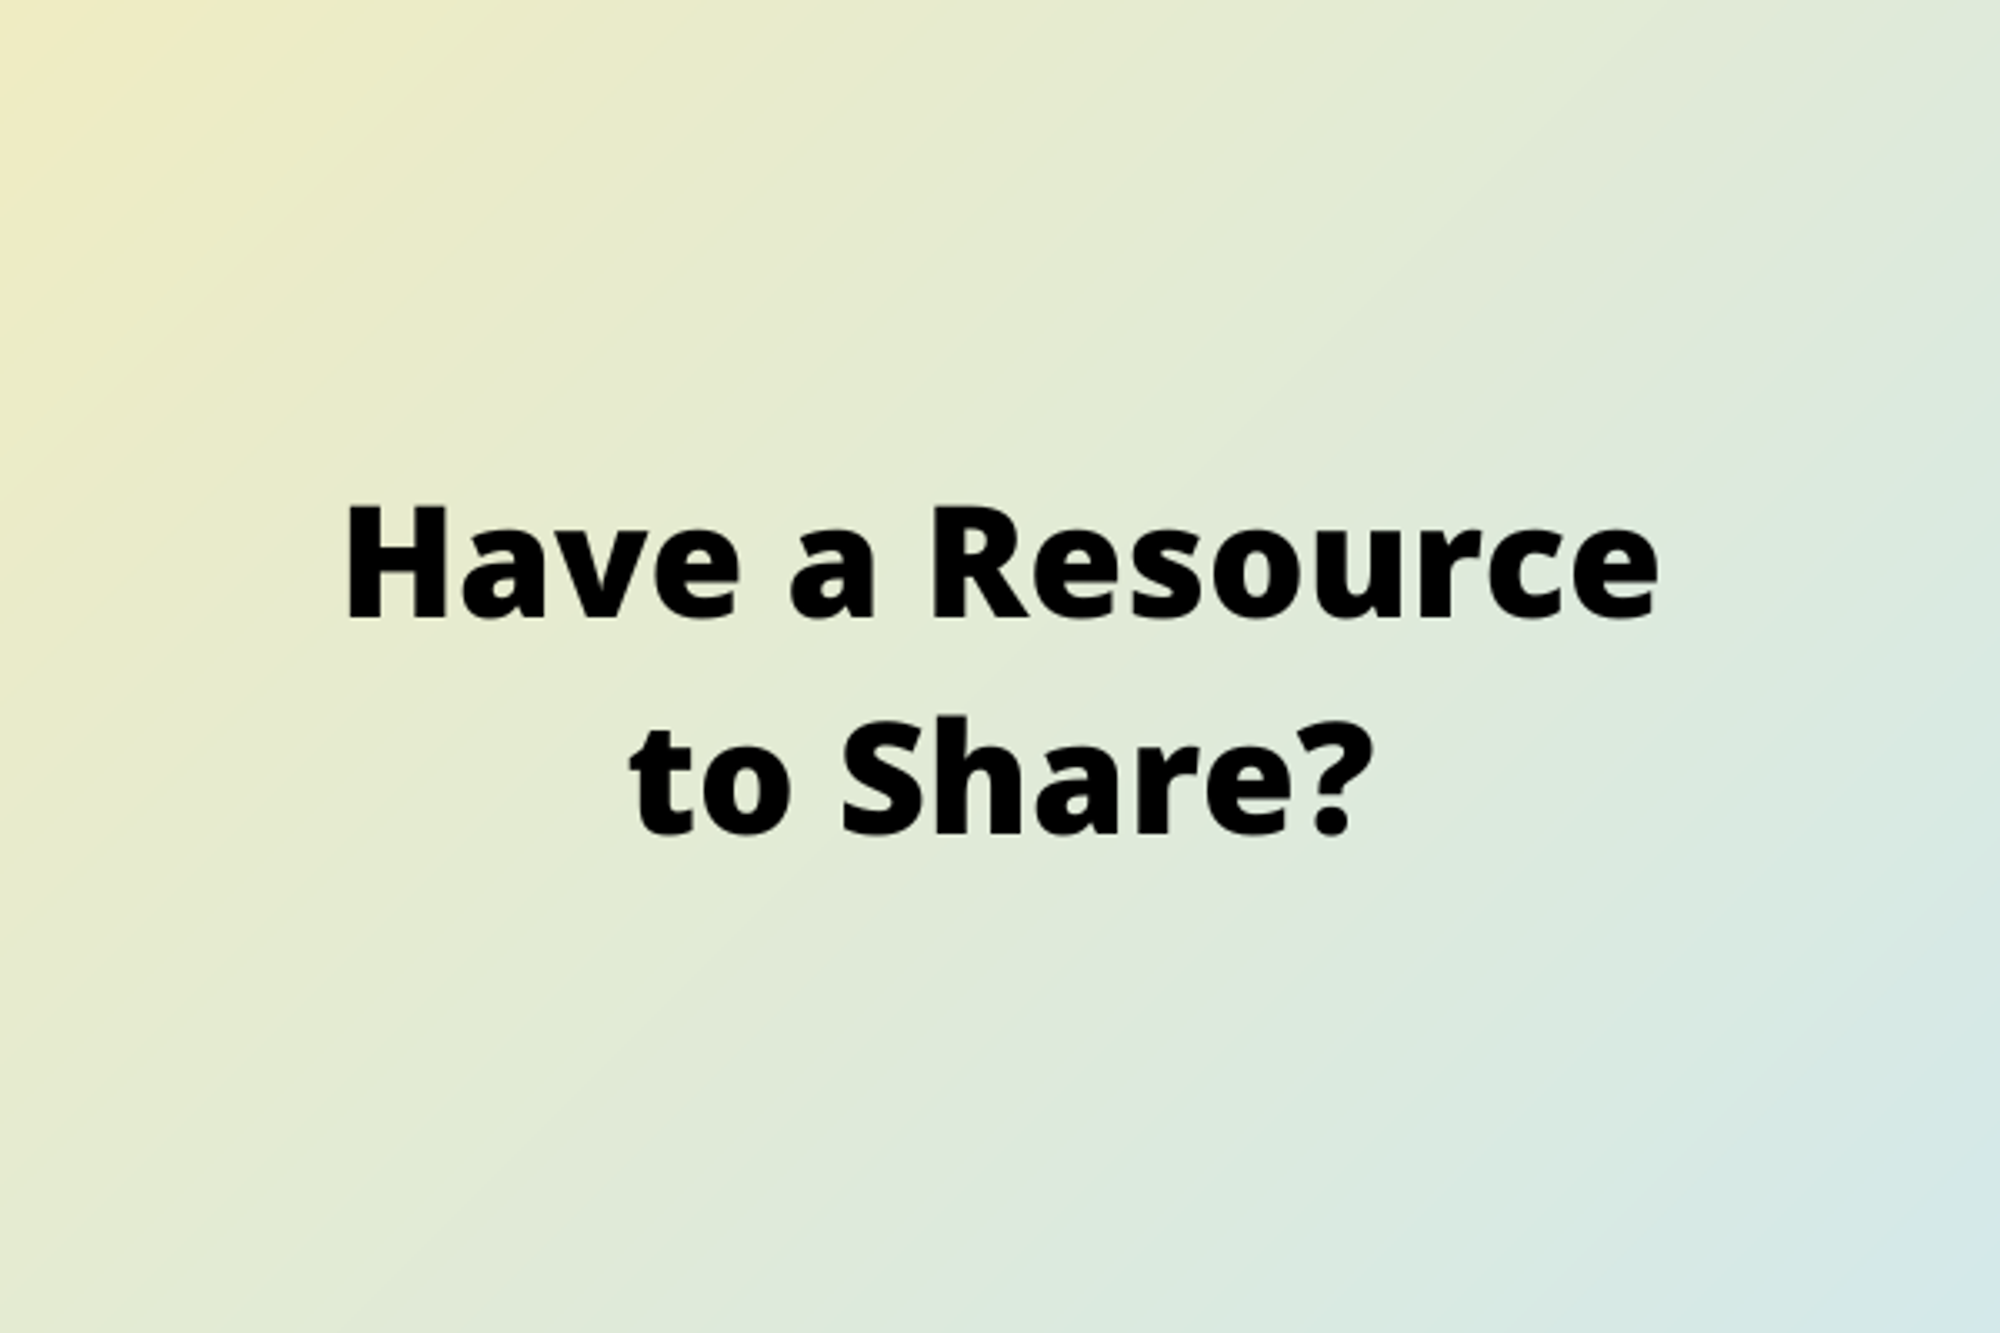 Have a resource to share.png